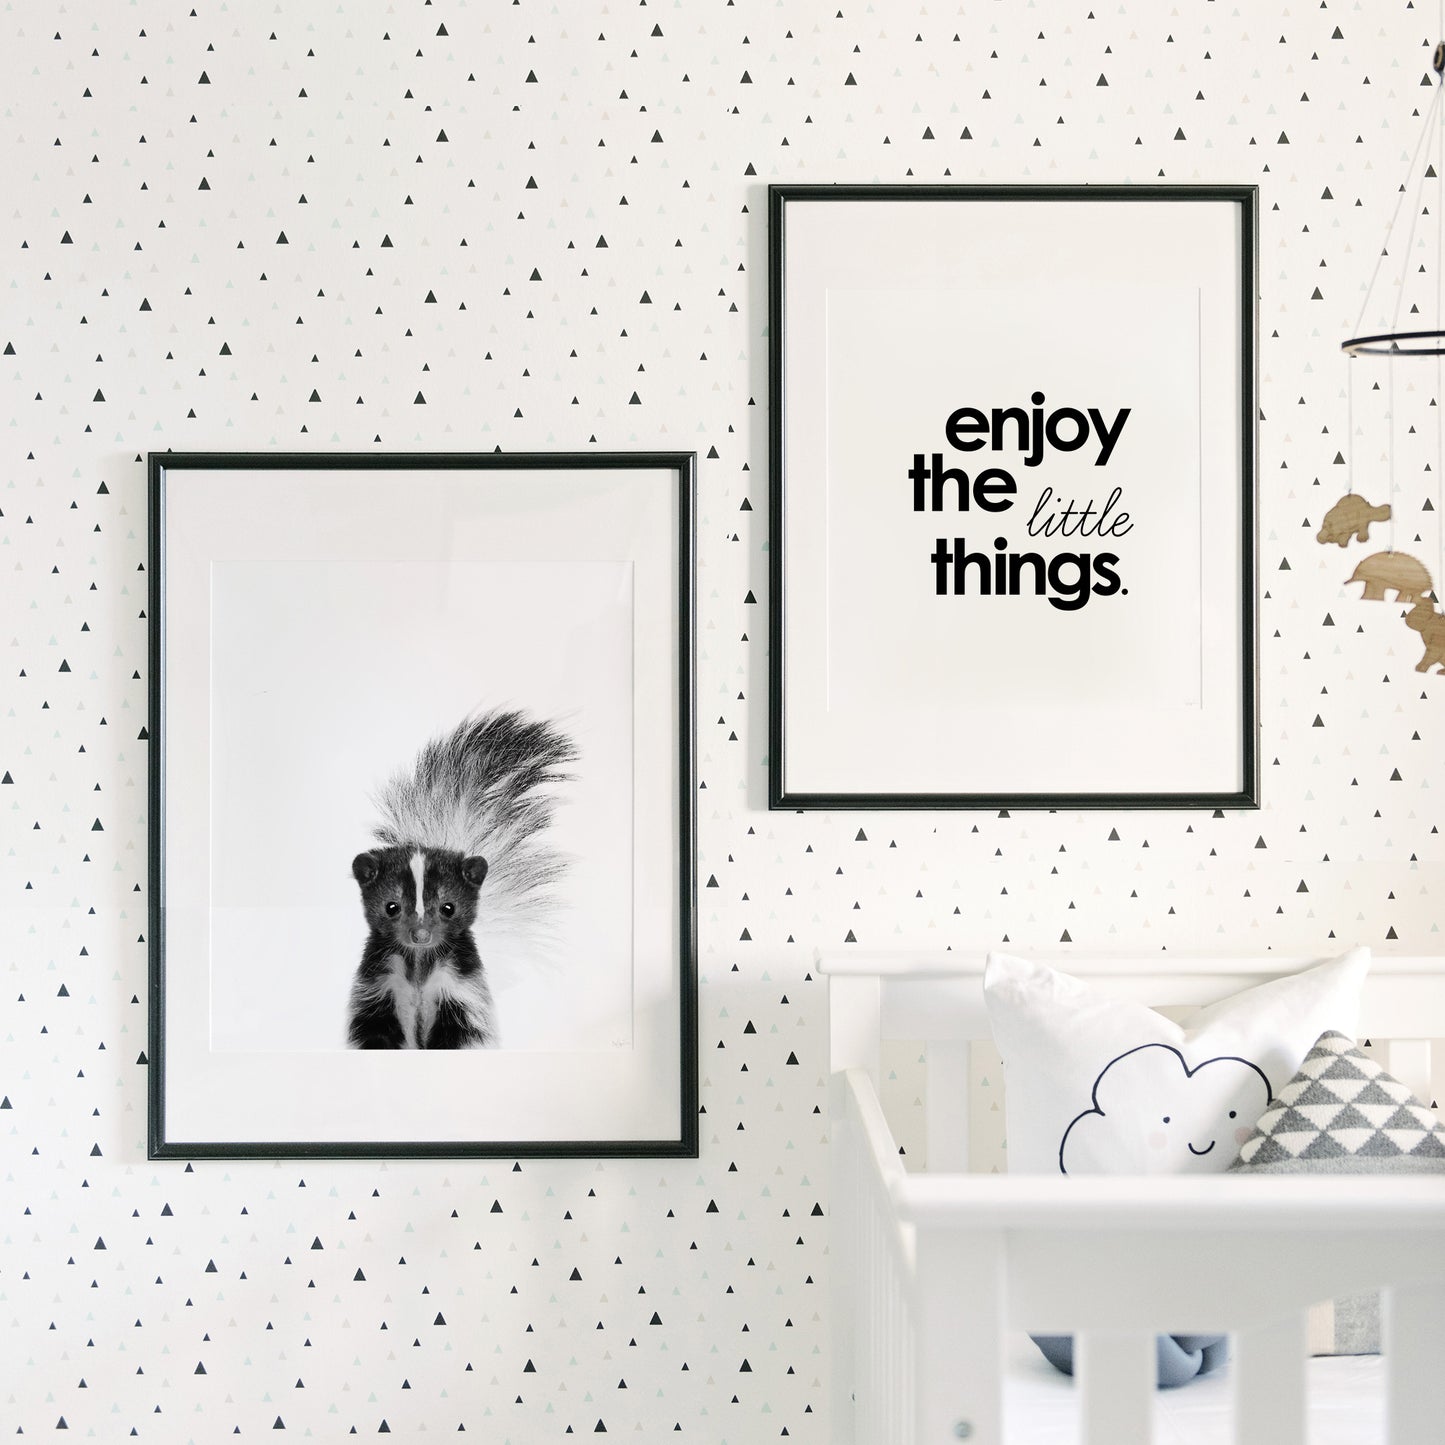 Black and White Skunk Wall Art for nursery